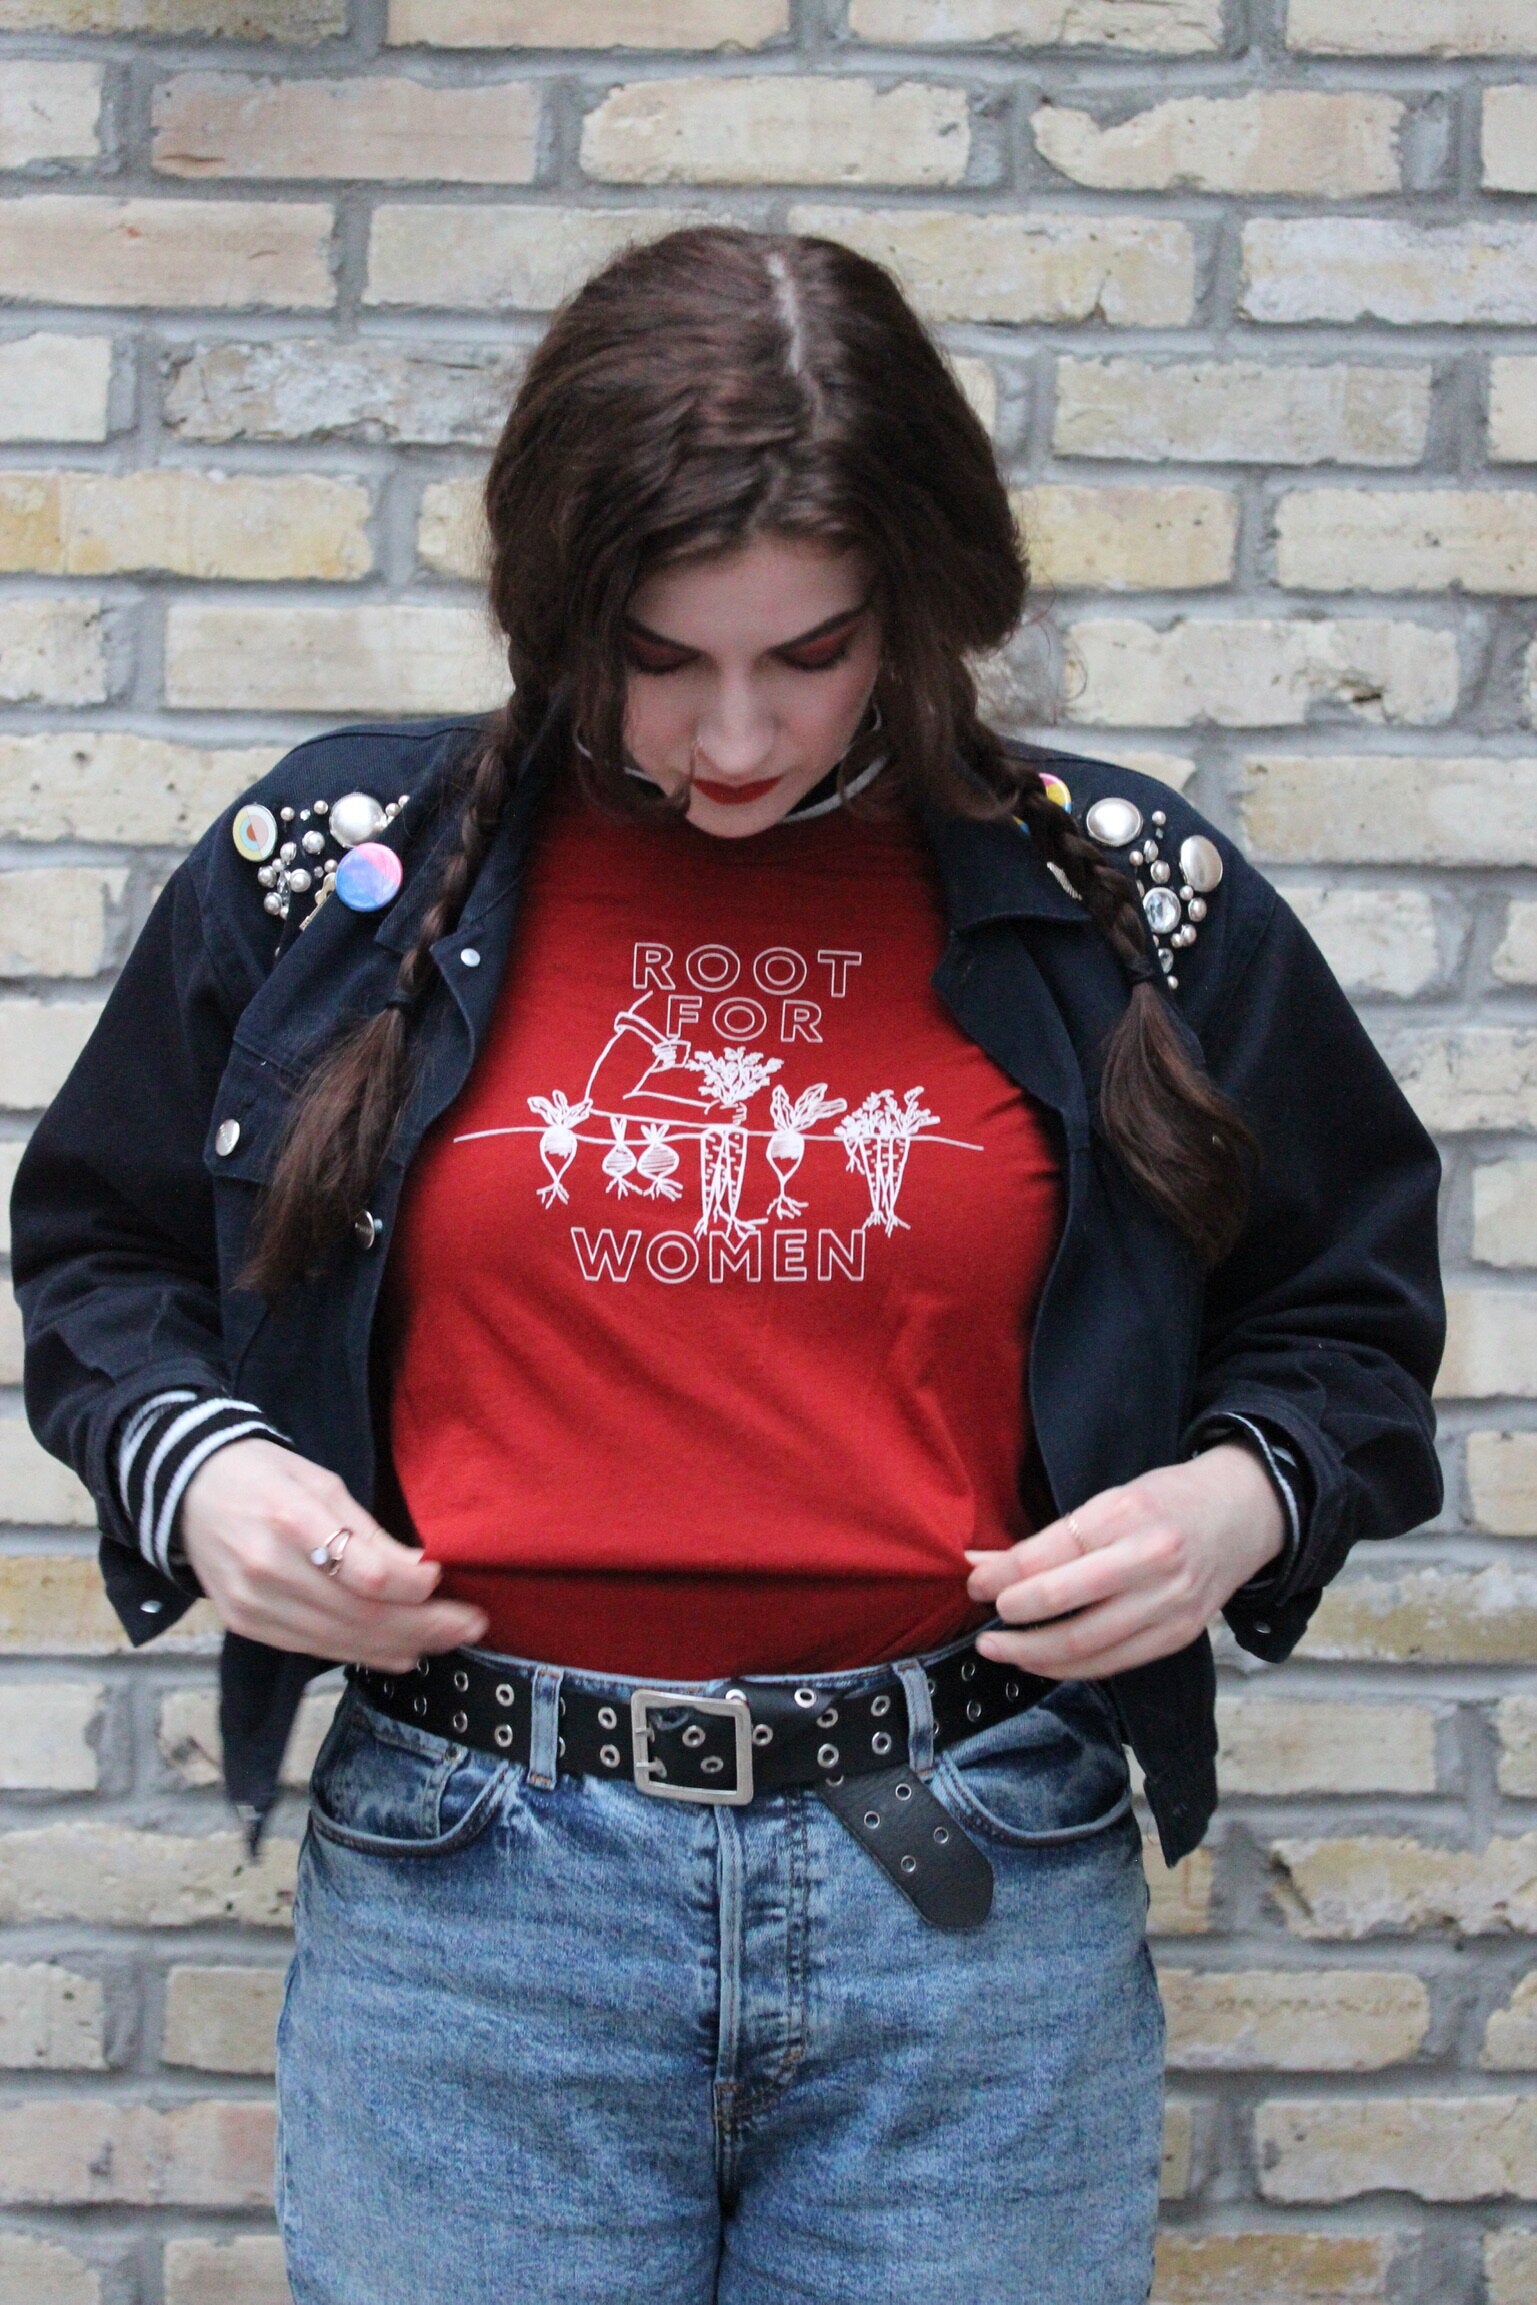 A woman stands in front of a brick wall wearing a red "Root for Women" t-shirt